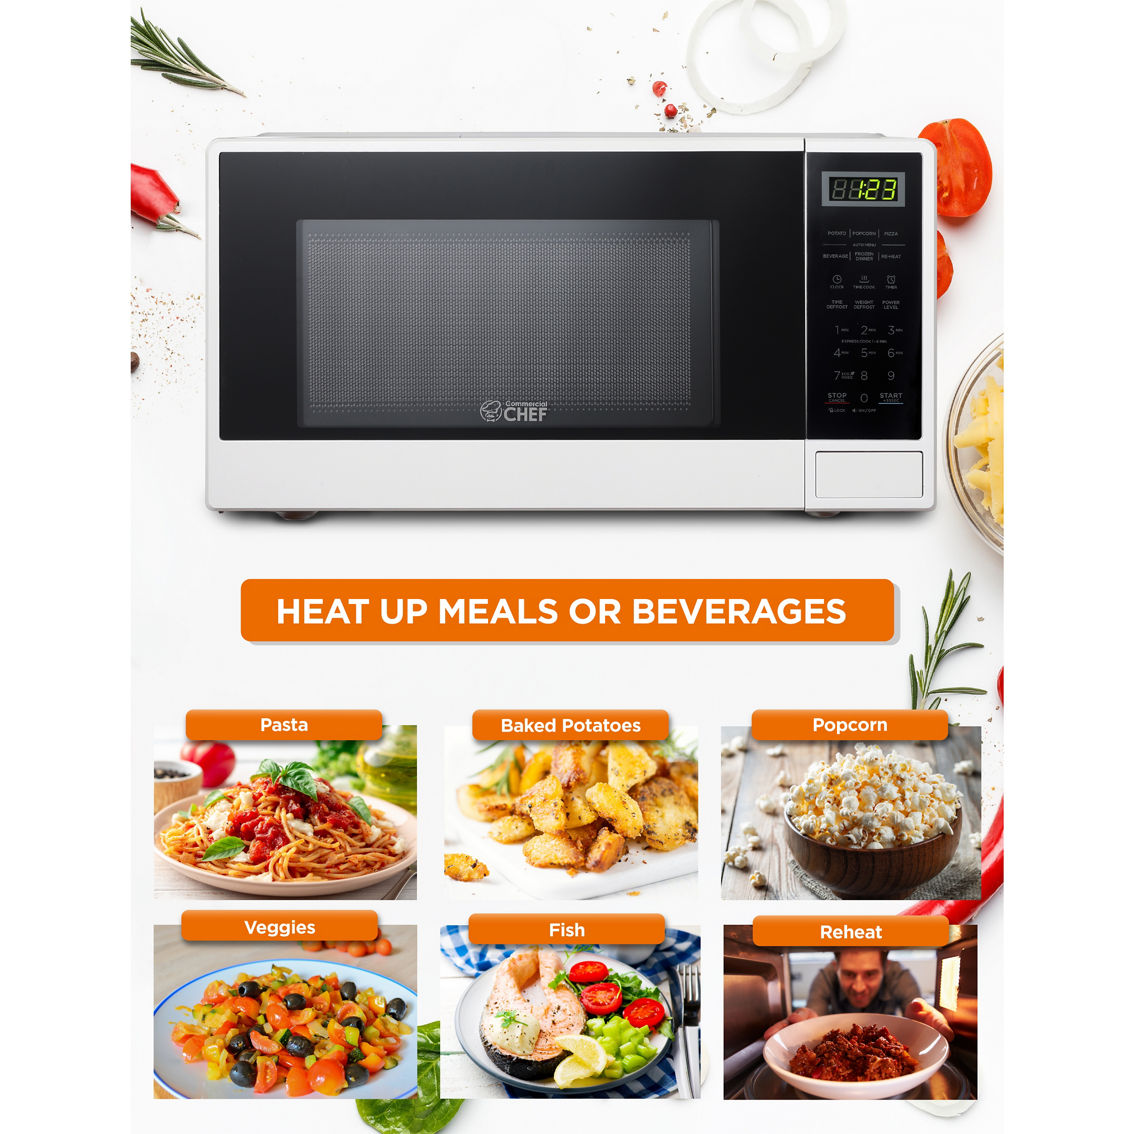 Commercial Chef 1.1 cu. ft. Counter Top Microwave - Image 4 of 7